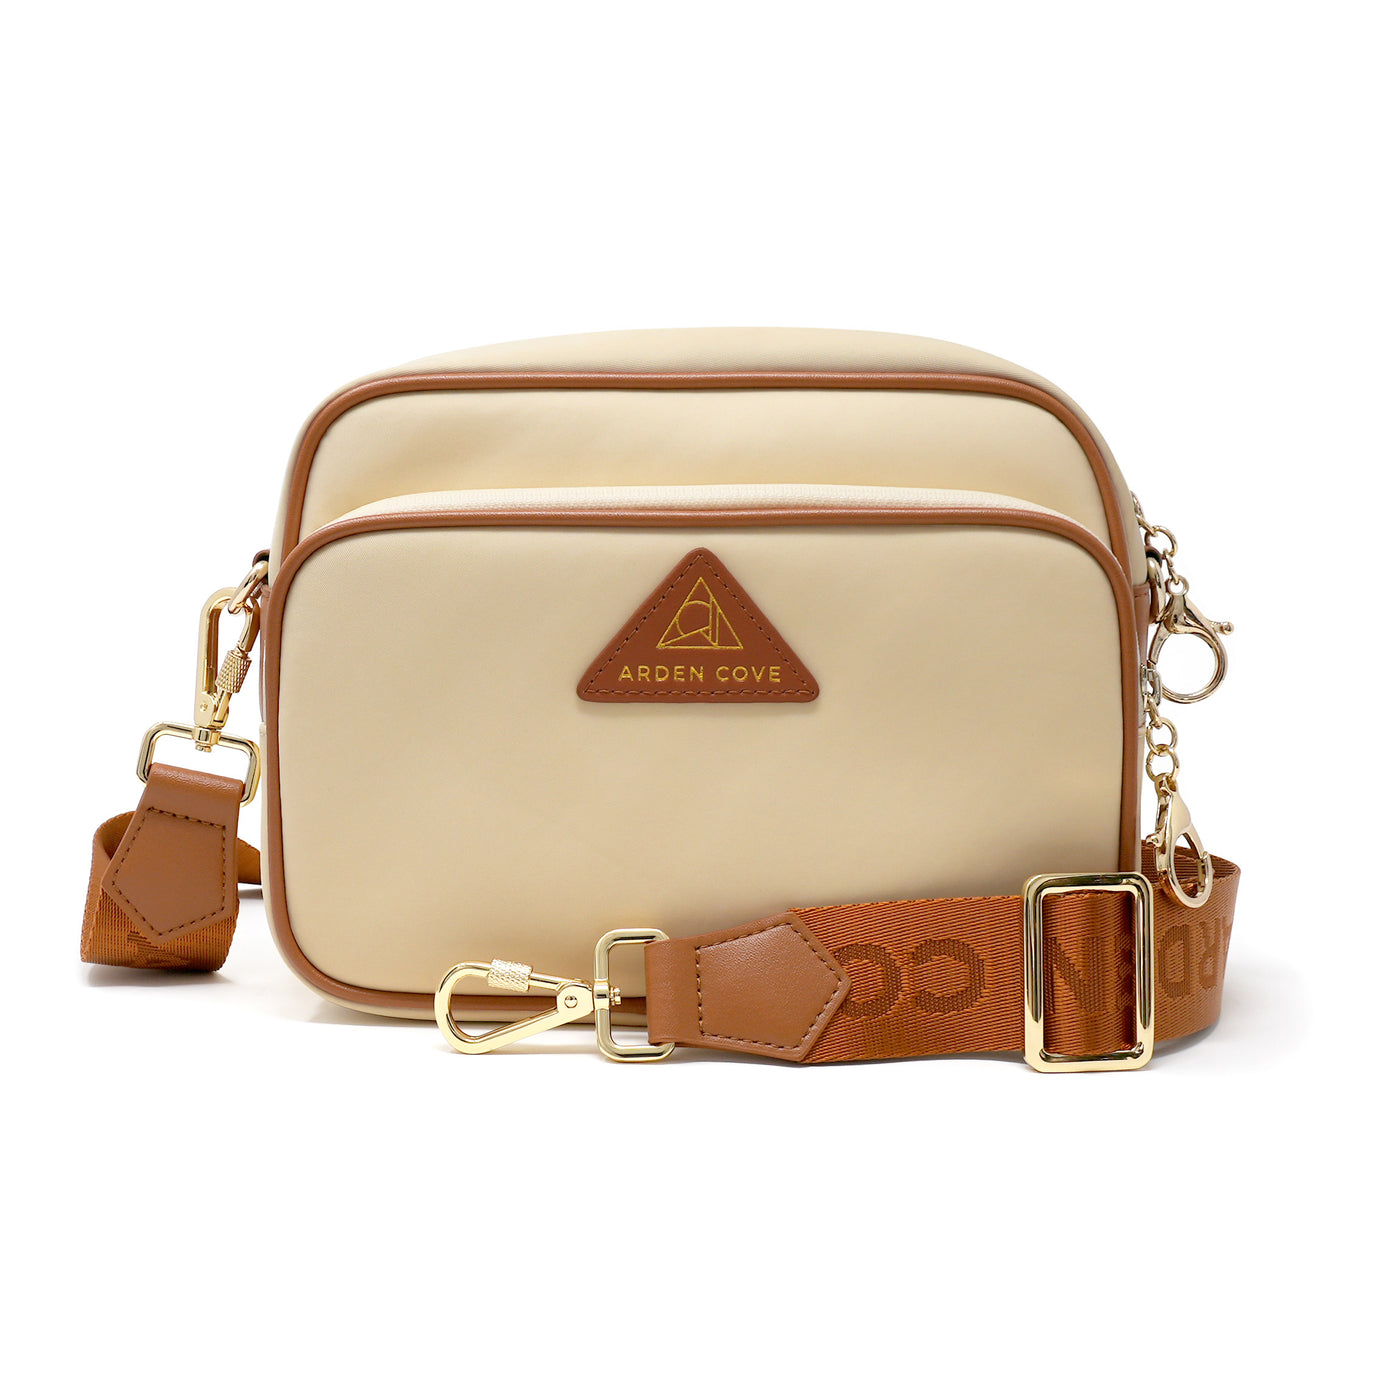 Anti-theft Water-resistant Travel Crossbody - Crissy Full Crossbody in Cream Gold with nylon jacquard strap & locking clasps straps - front view - Arden Cove